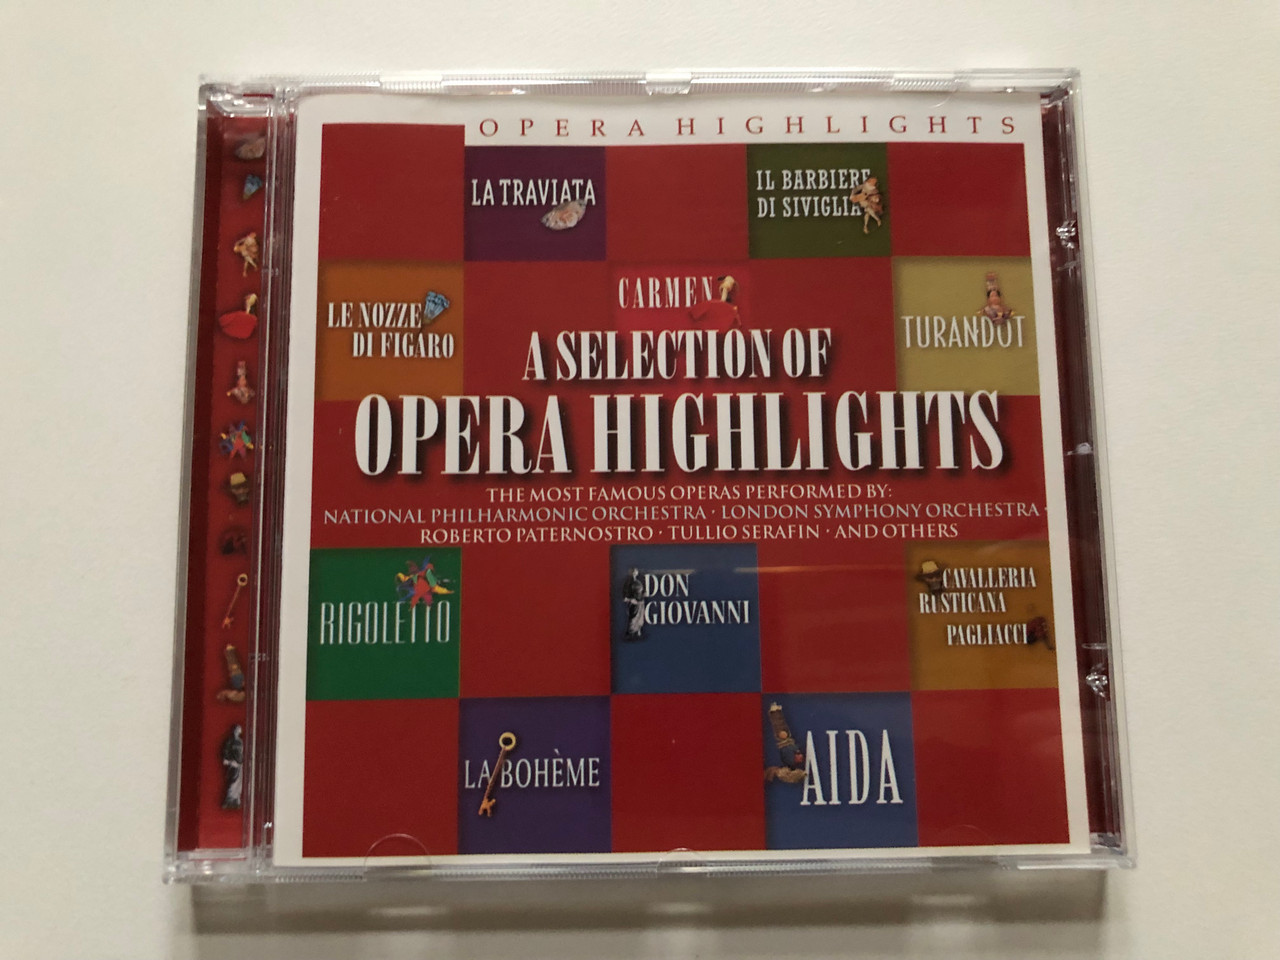 https://cdn10.bigcommerce.com/s-62bdpkt7pb/products/0/images/312908/Opera_Highlights_A_Selection_Of_Opera_Highlights_-_The_Most_Famous_Operas_Performed_By_National_Philharmonic_Orchestra_London_Symphony_Orchestra_Roberto_Paternostro_Tullio_Serafin_and_o_1__28888.1700213448.1280.1280.JPG?c=2